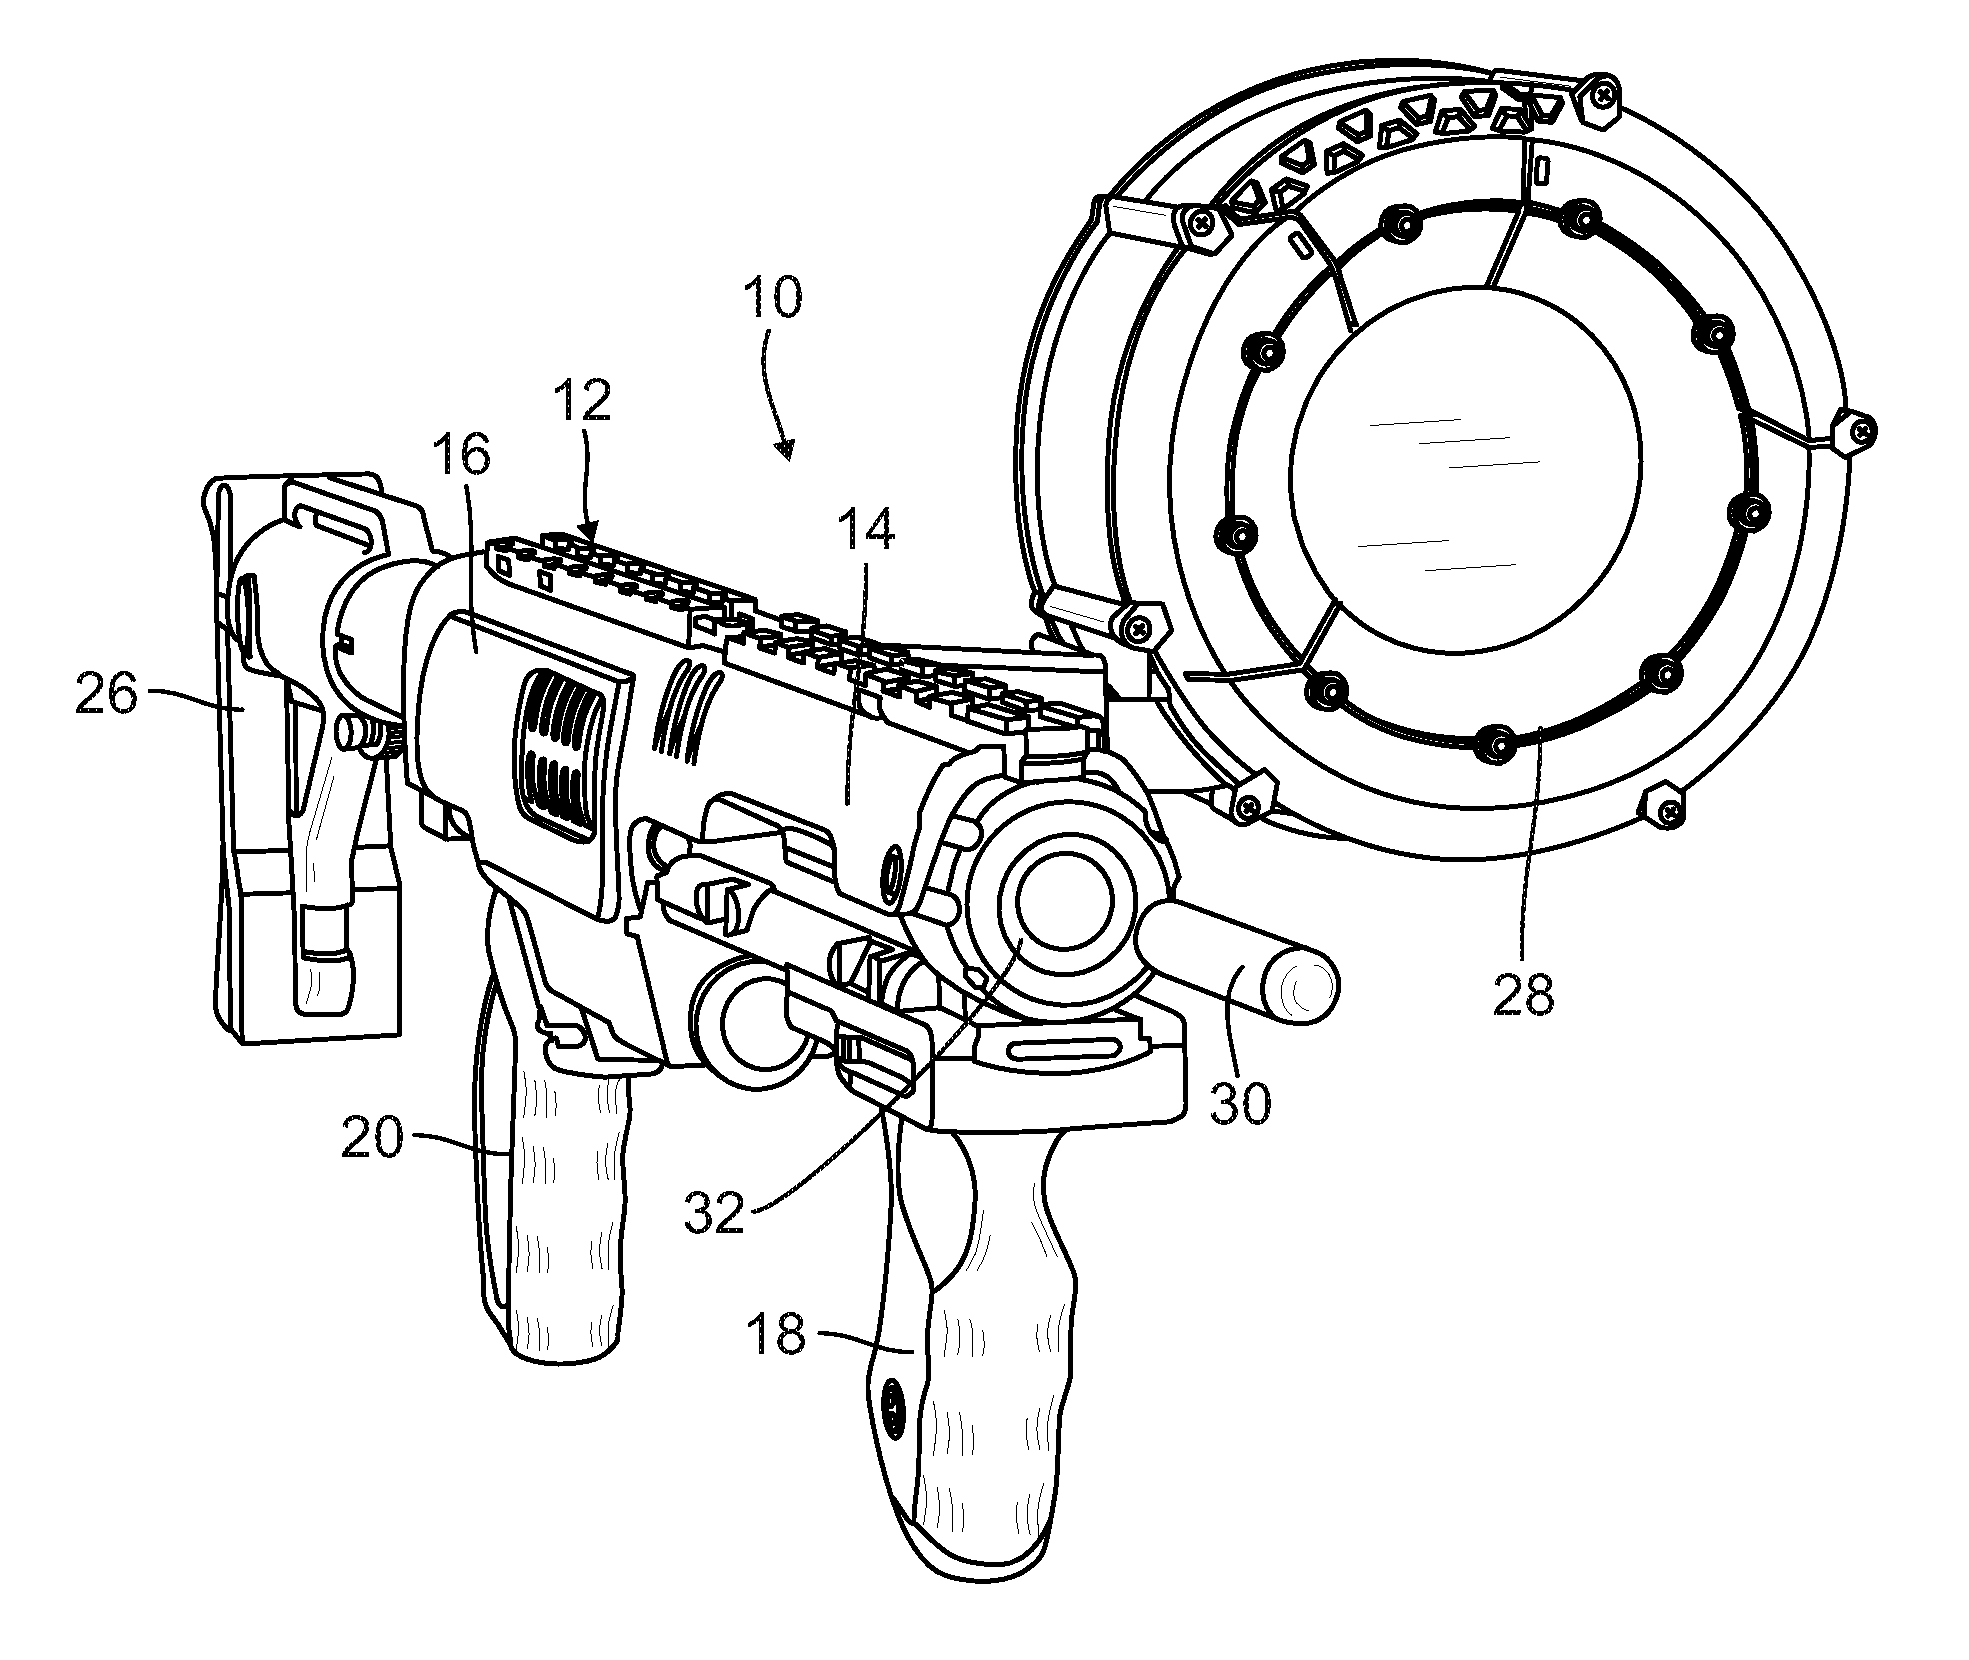 Toy dart launcher apparatus with momentary lock